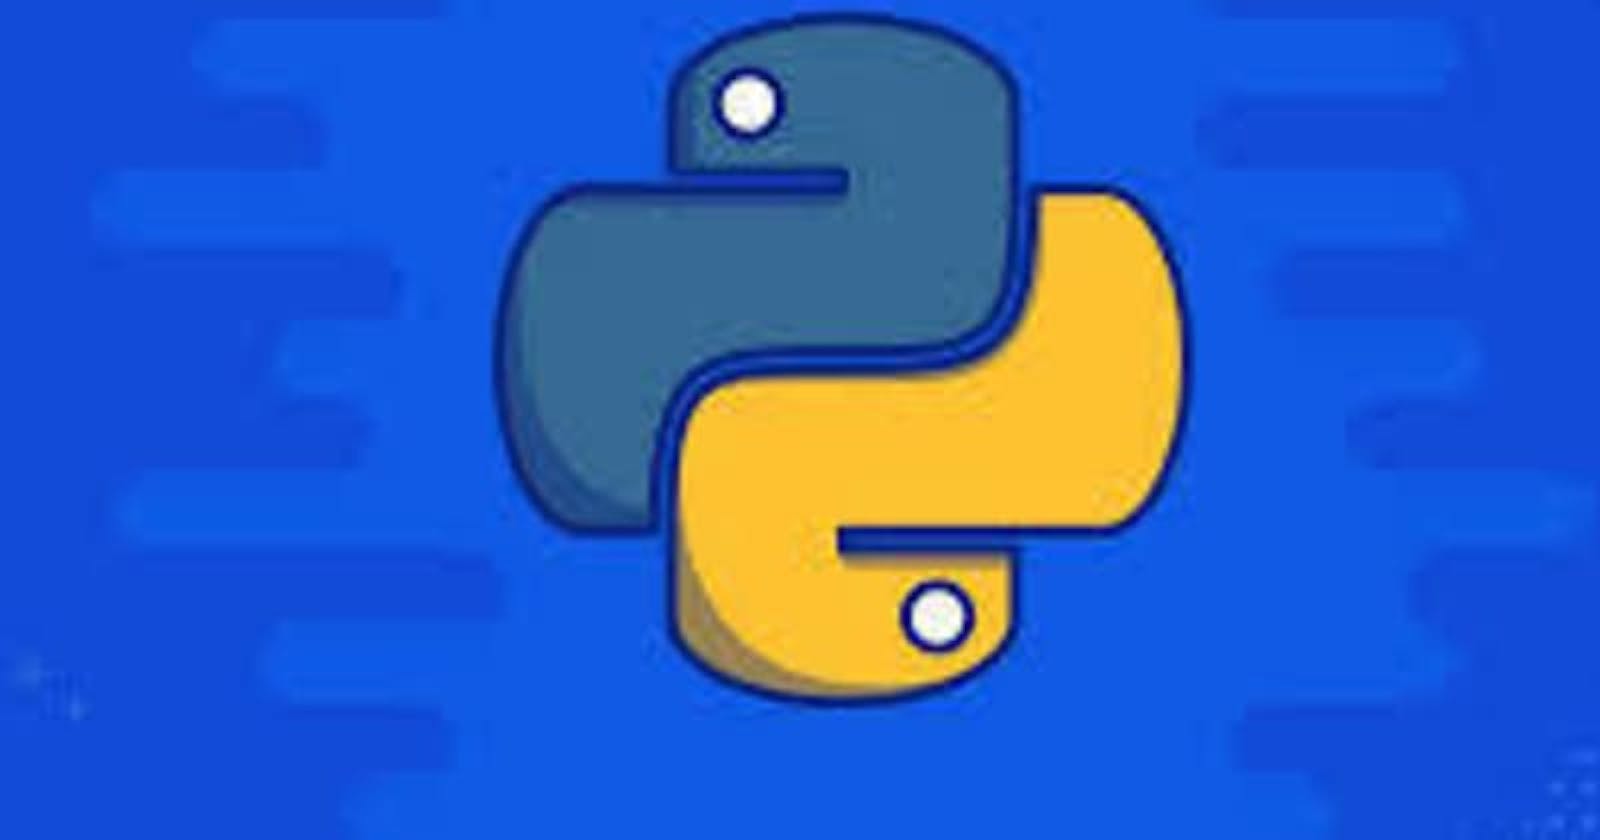 Learning Python #2 - Data types, operators, variable creation...